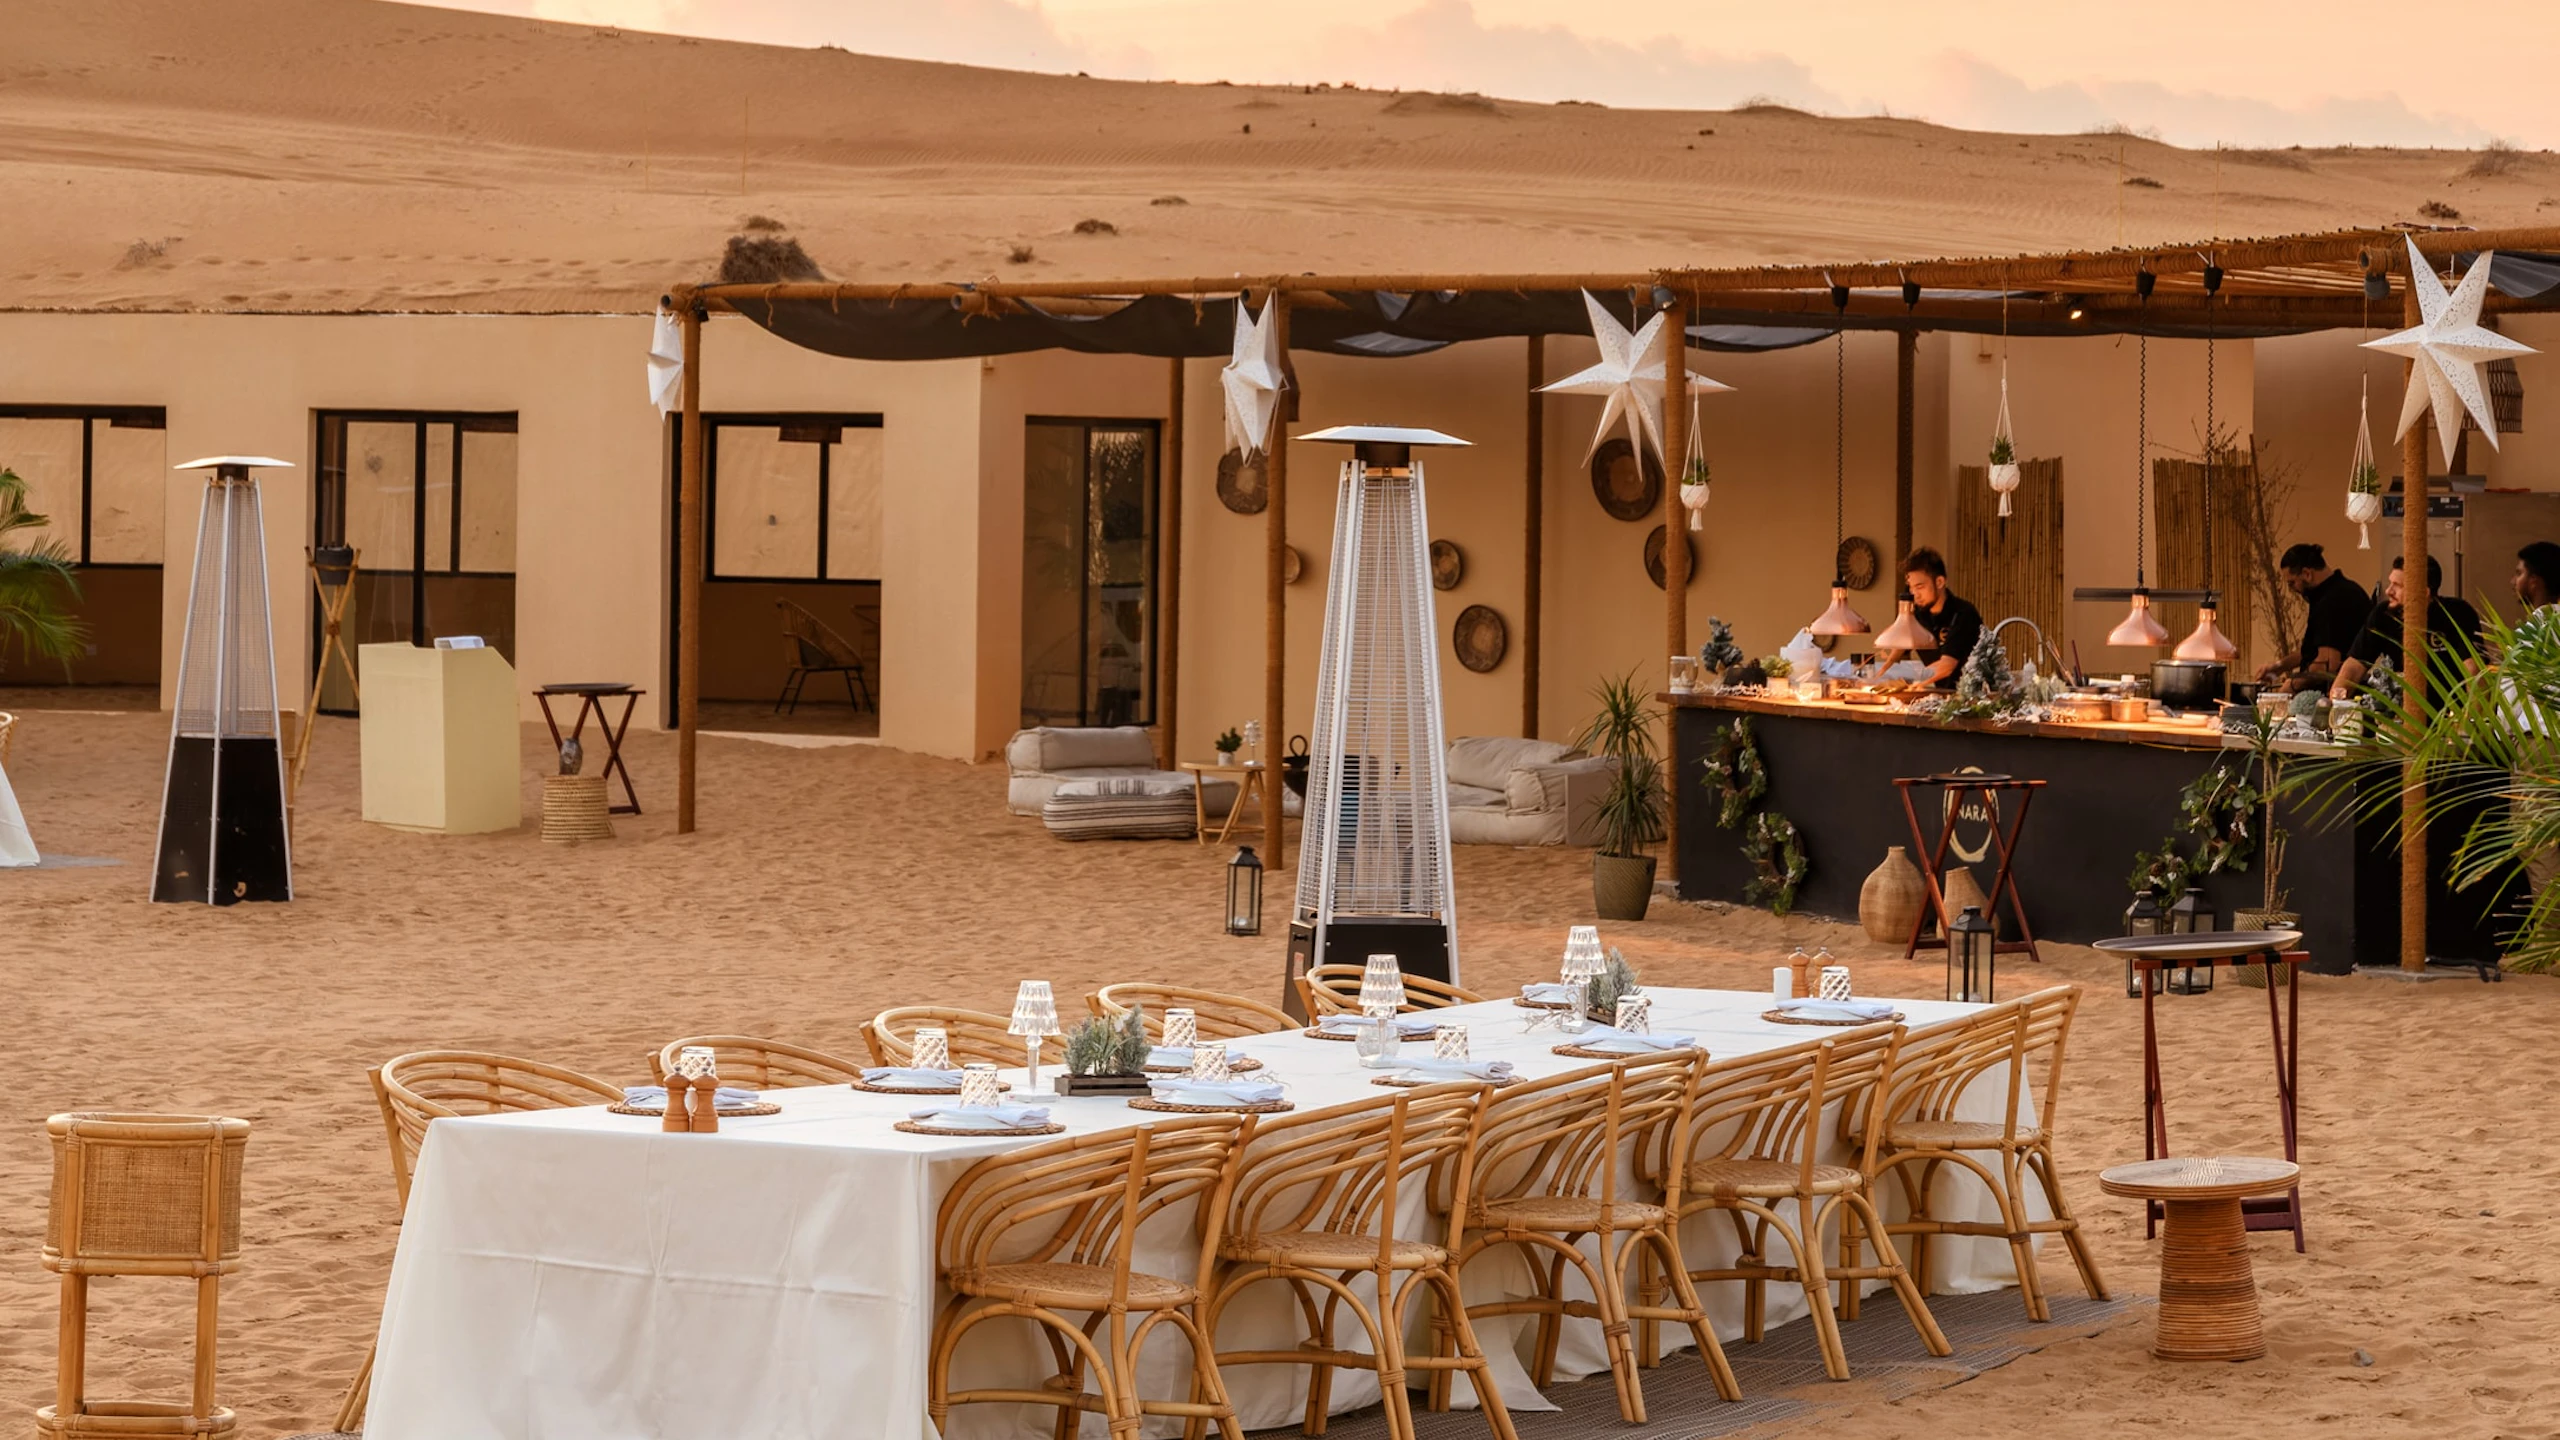 Sonara Camp: Sunset and Dinner Experience  Location